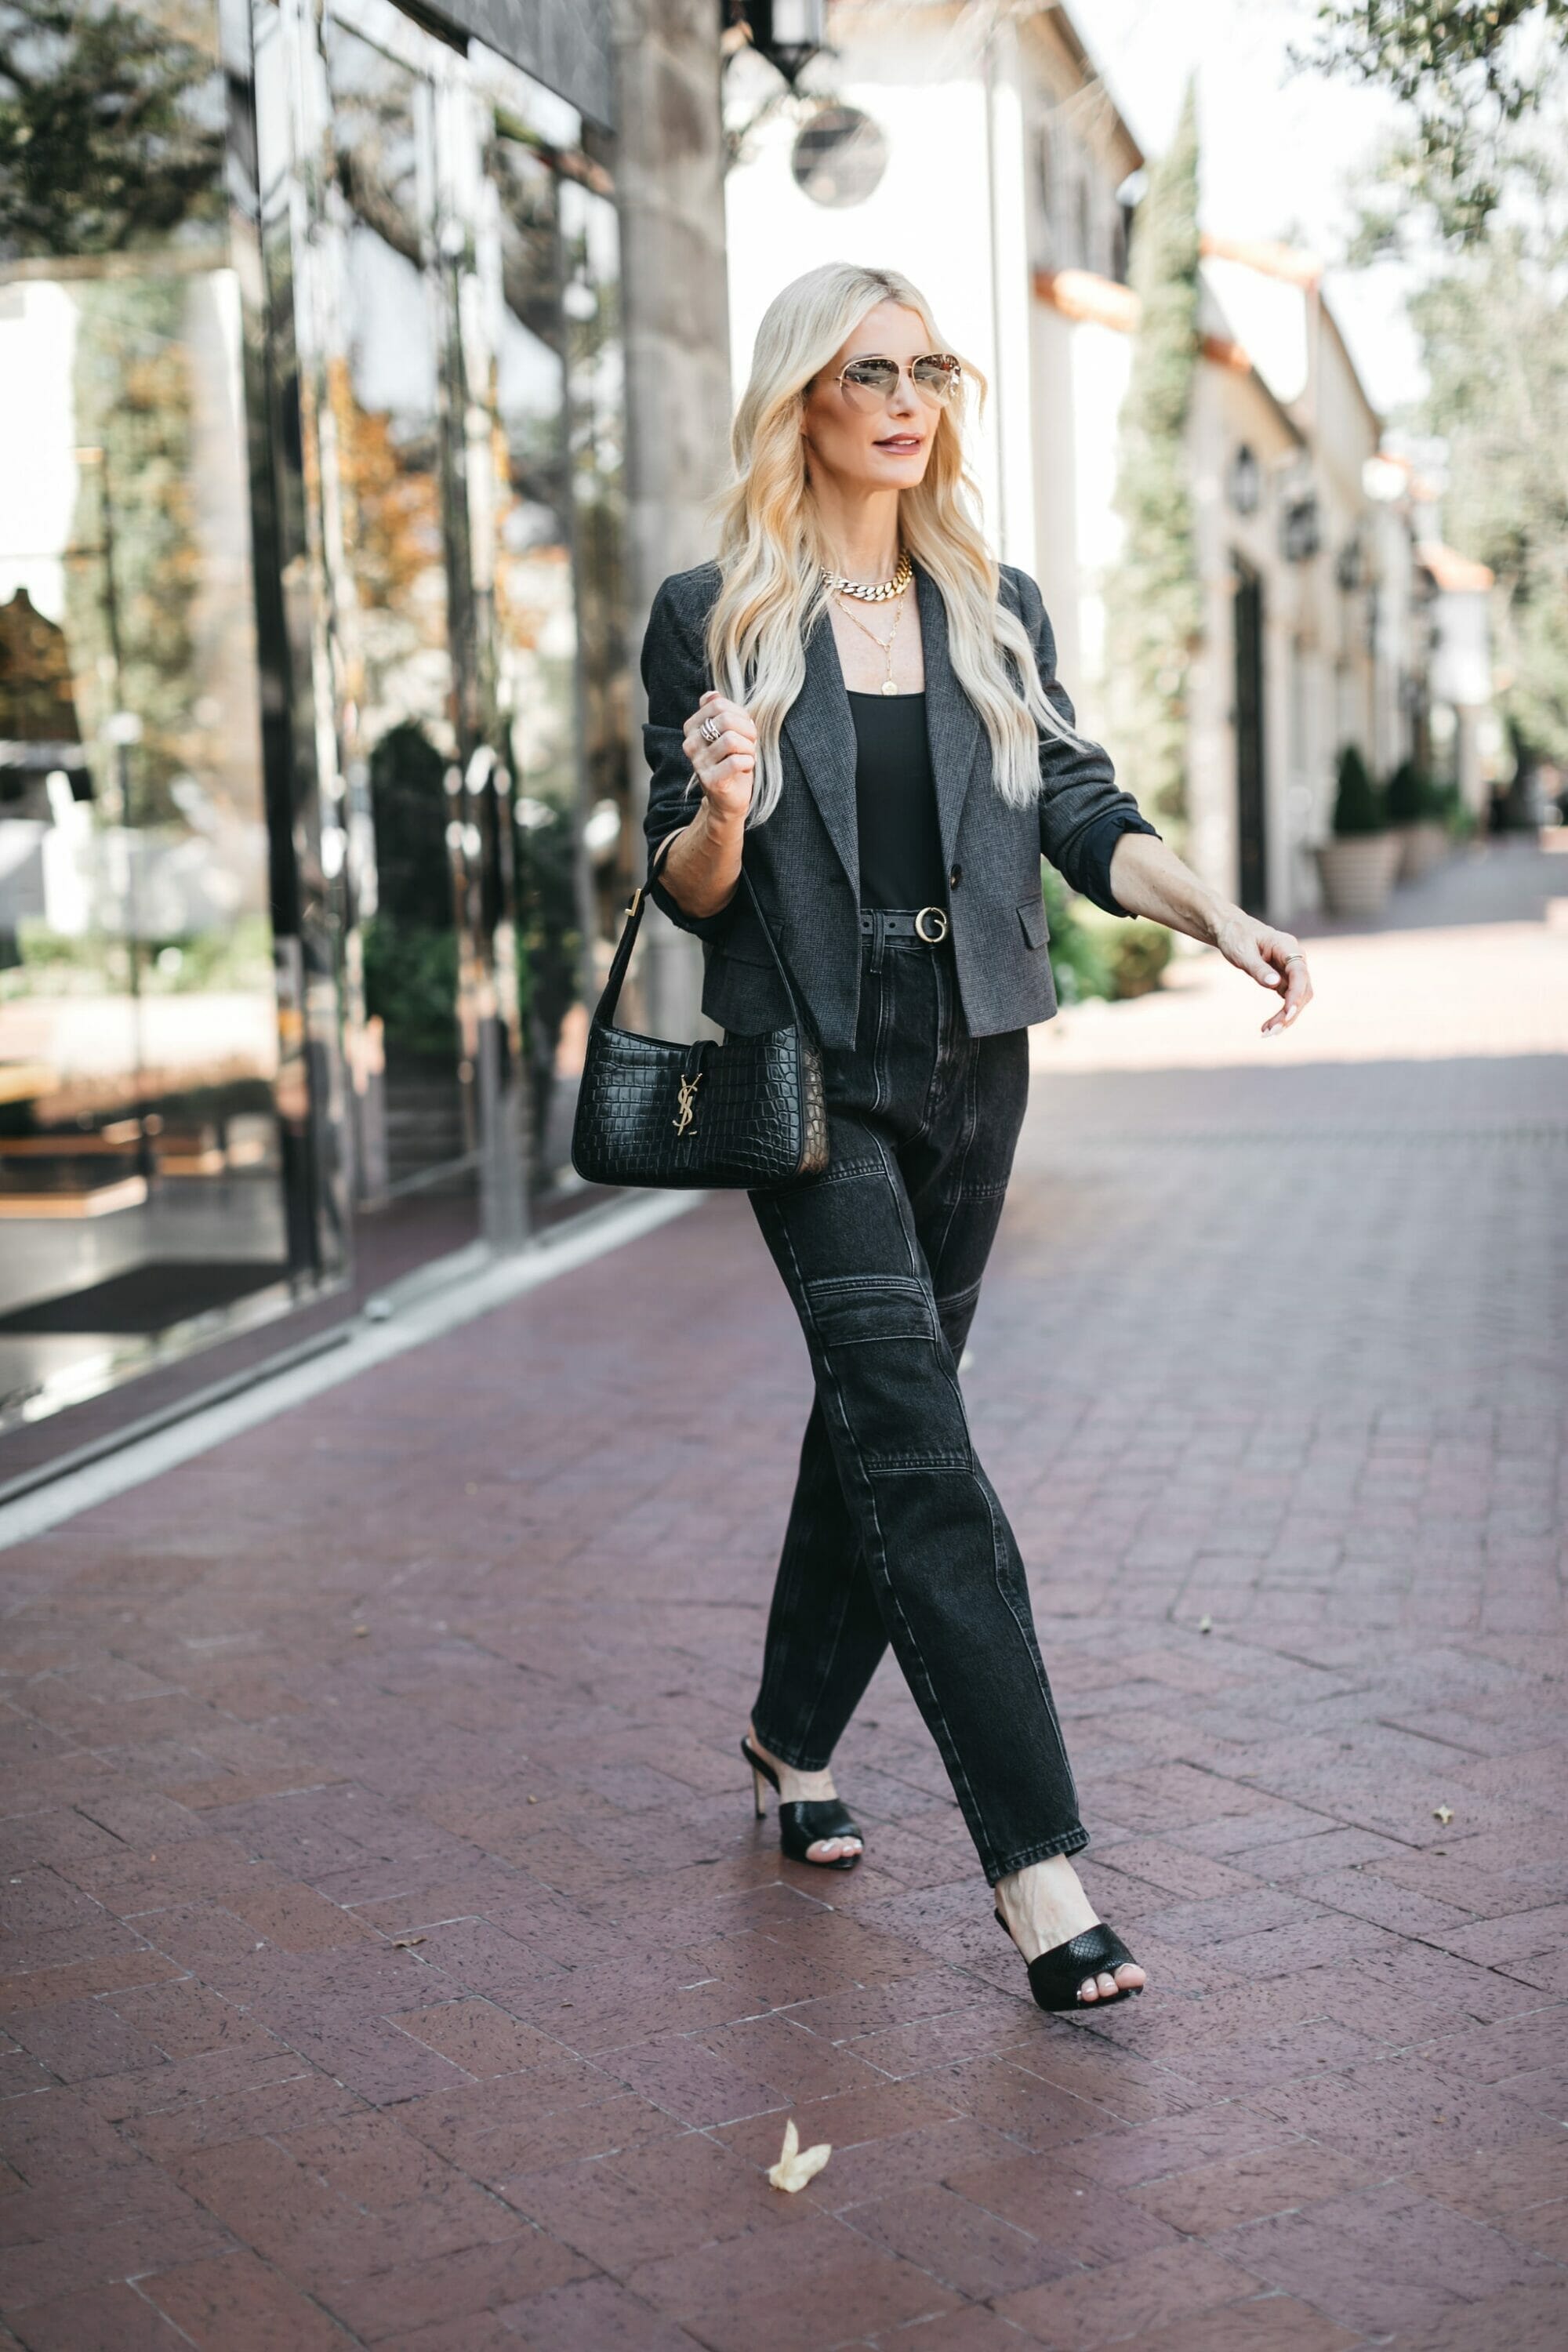 Blazer and Jeans Outfits for Fall - the gray details